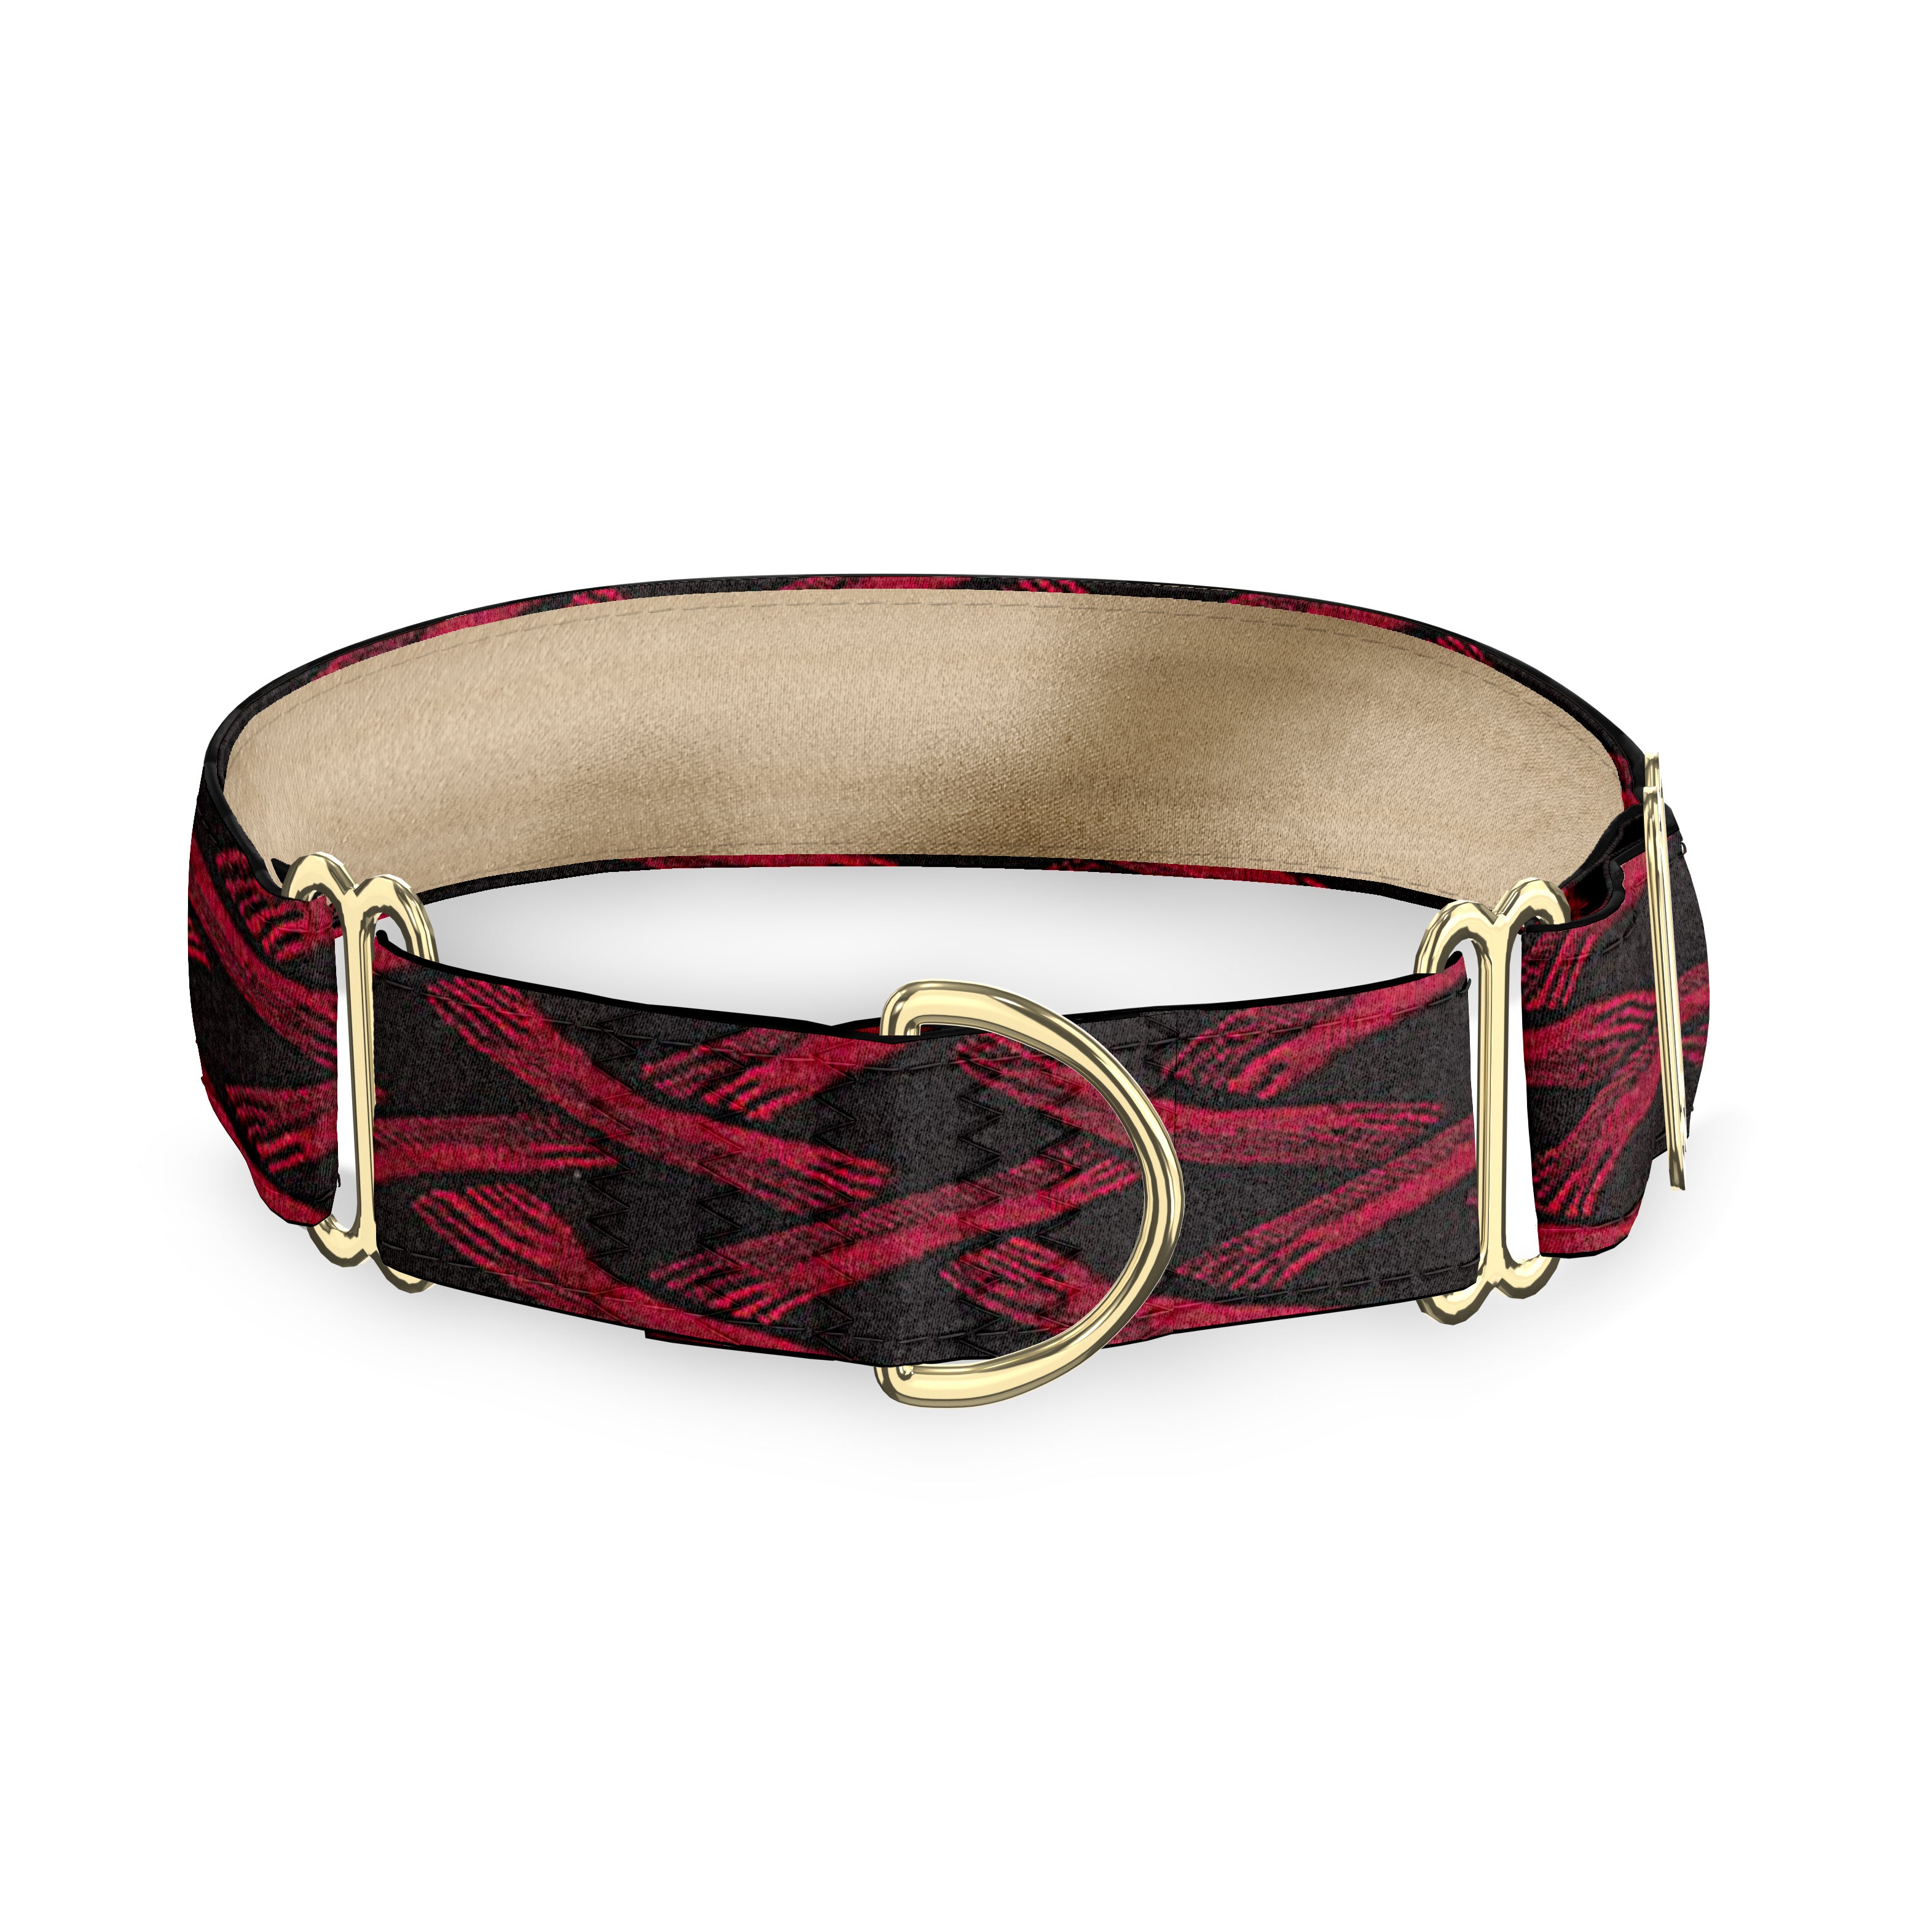 The Weave Red 1.5" Collar